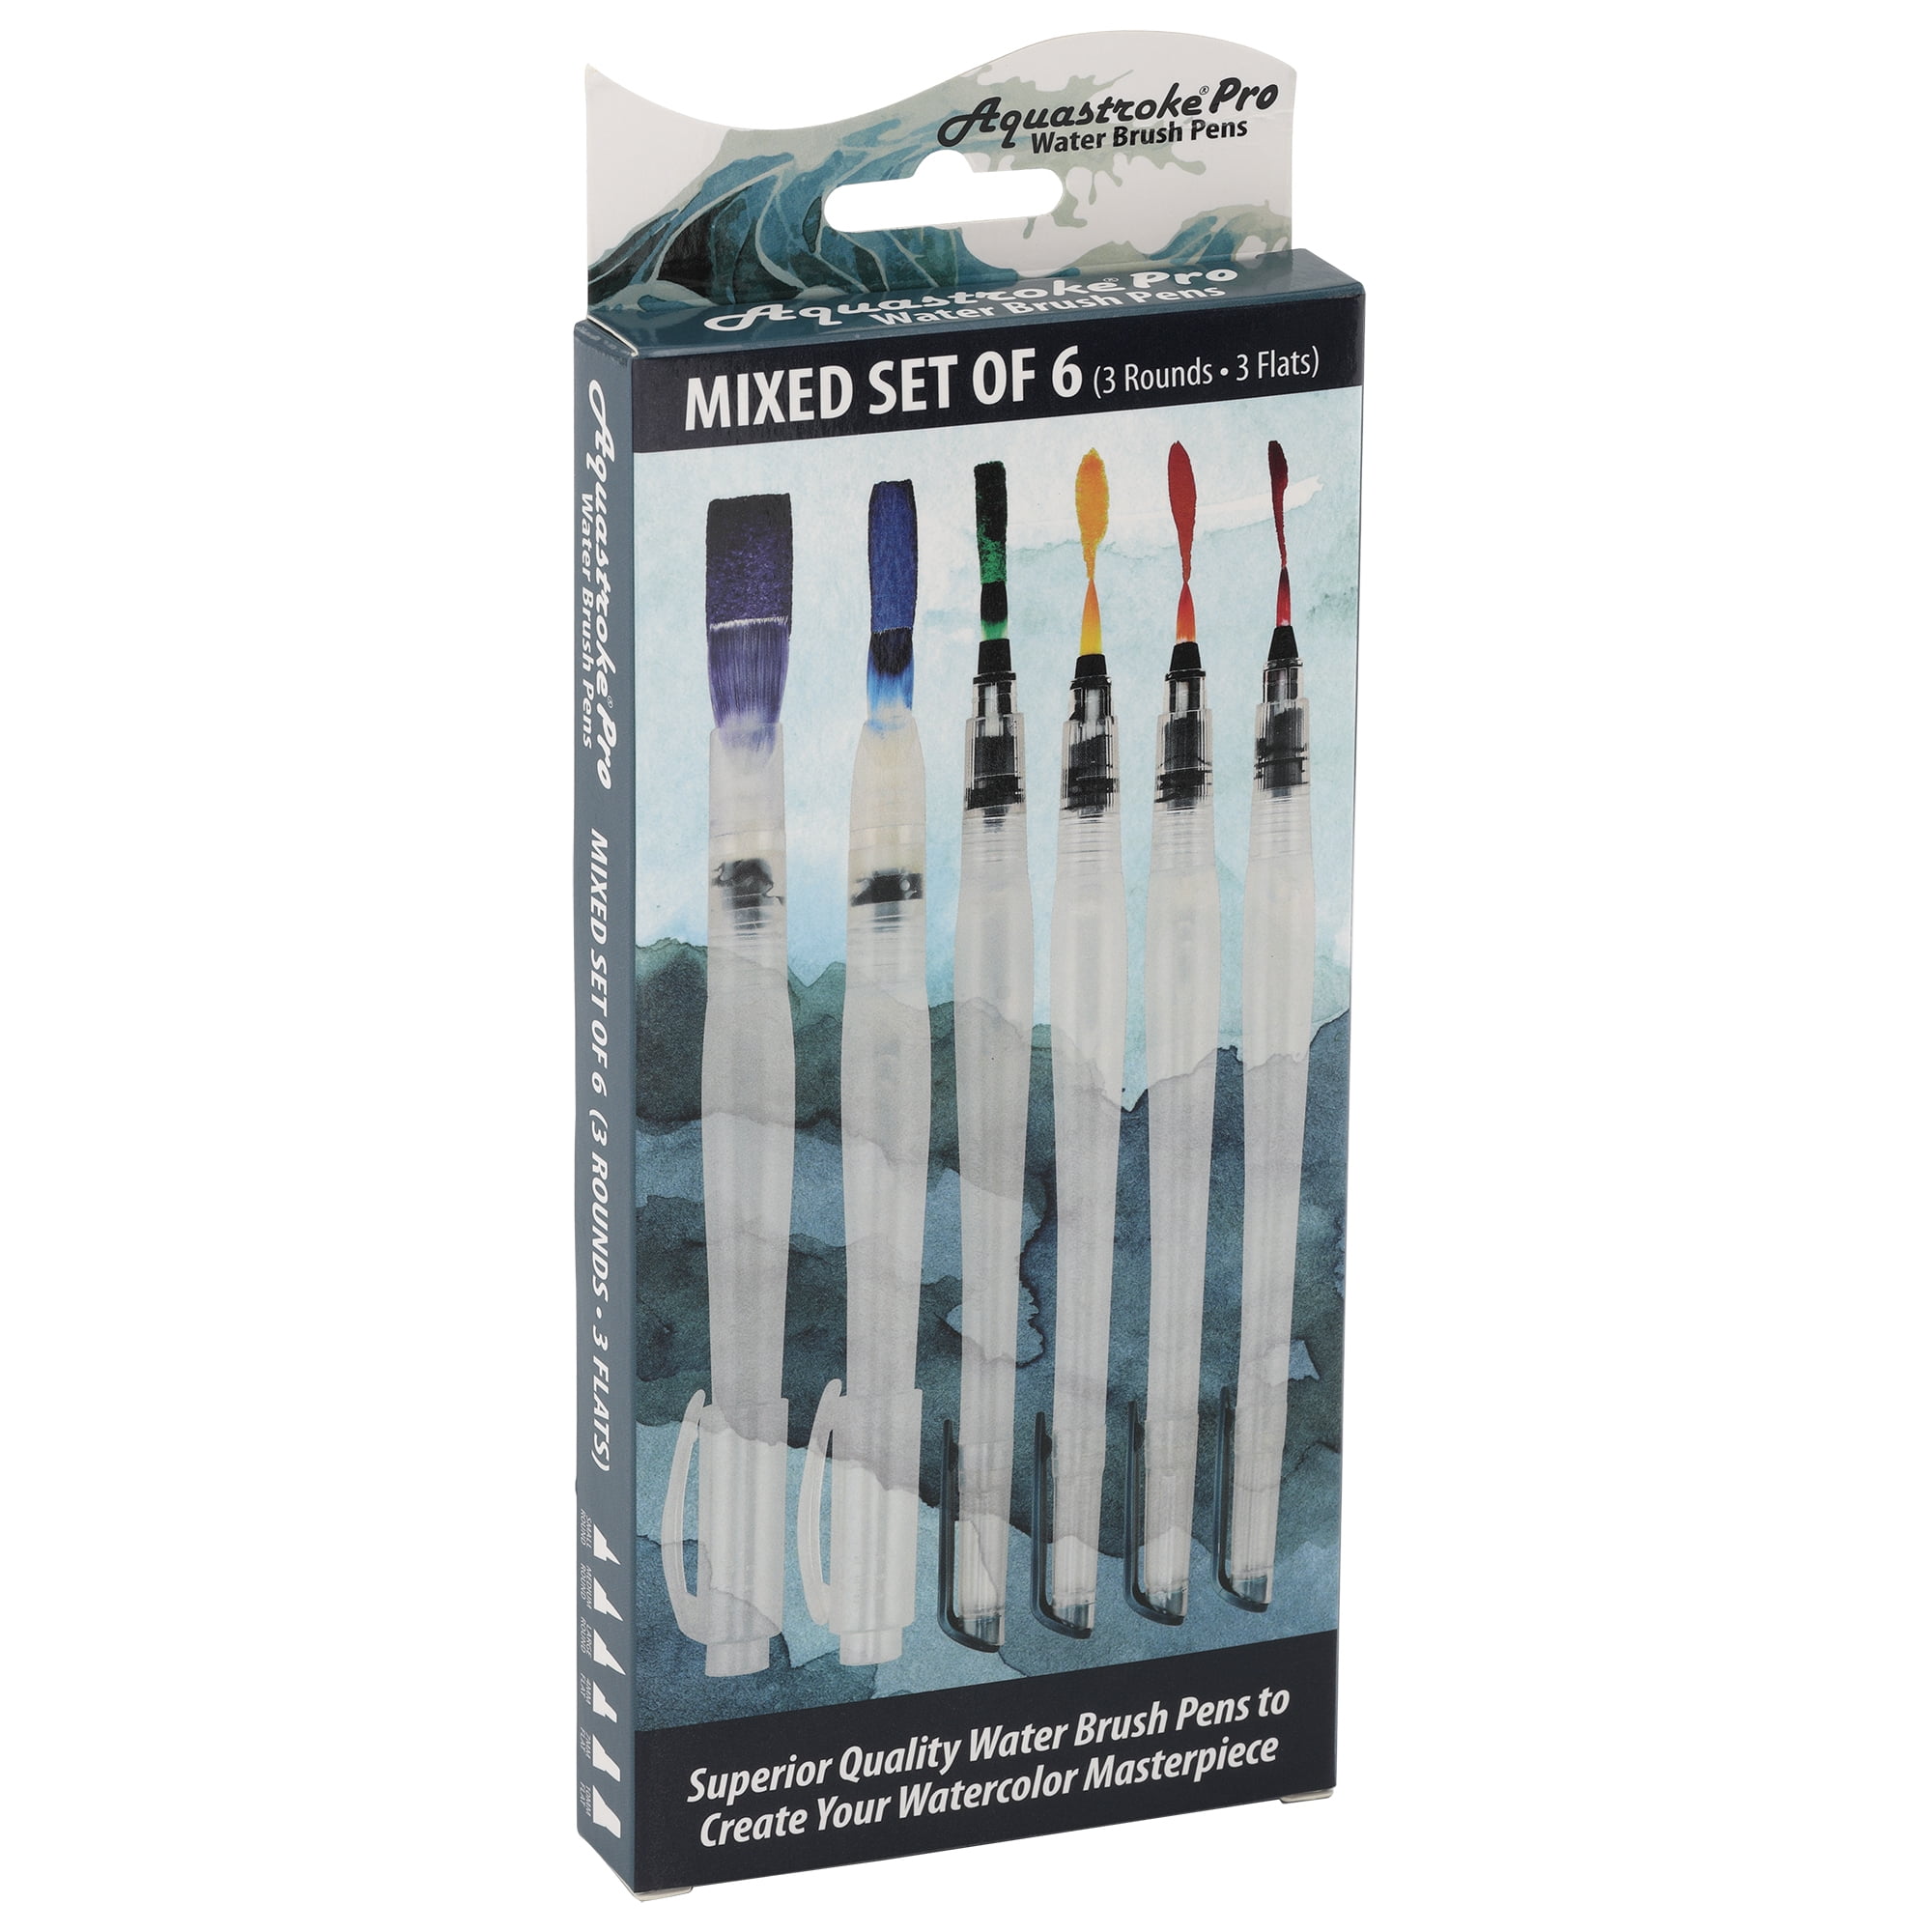 Aquastroke-Go Set of 3 Water Brushes Pens by Creative Mark